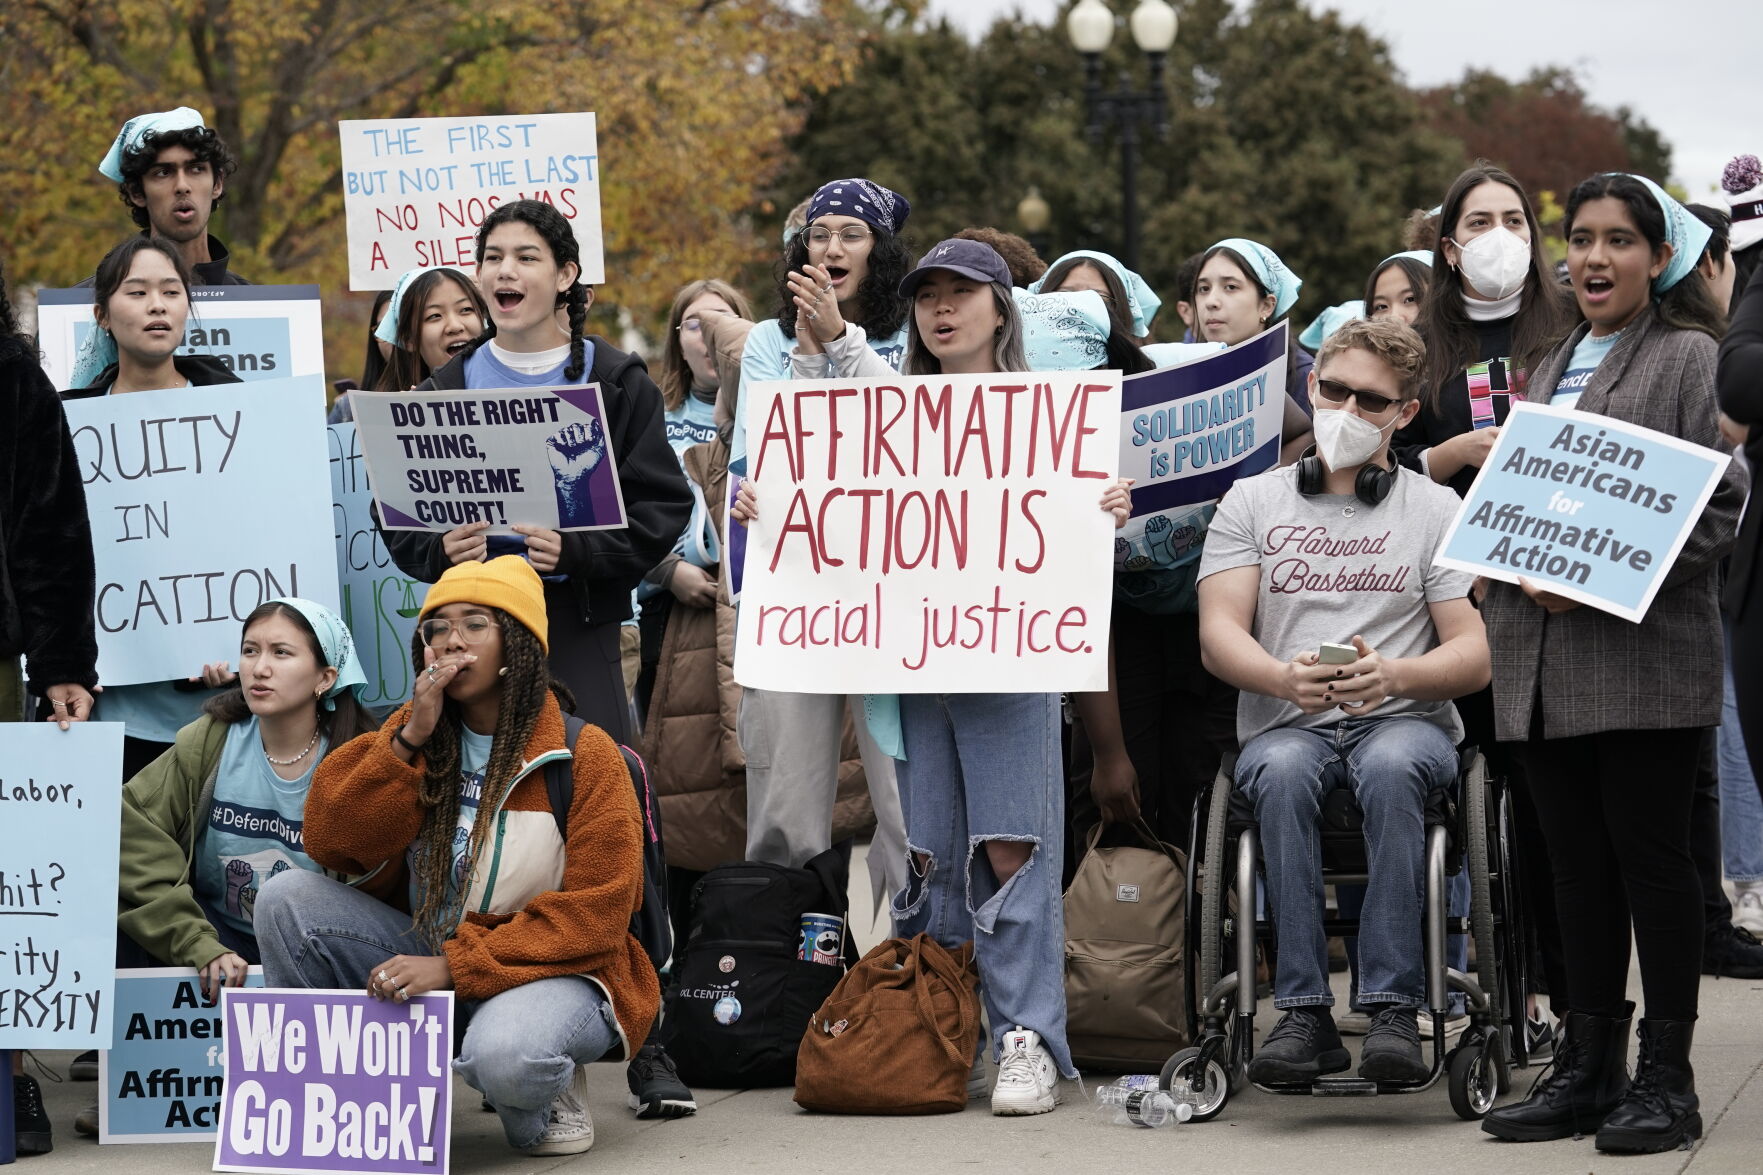 <p>People rally outside the Supreme Court as the court begins to hear oral arguments in two cases that could decide the future of affirmative action in college admissions, Monday, Oct. 31, 2022, in Washington. (AP Photo/J. Scott Applewhite)</p>   PHOTO CREDIT: J. Scott Applewhite